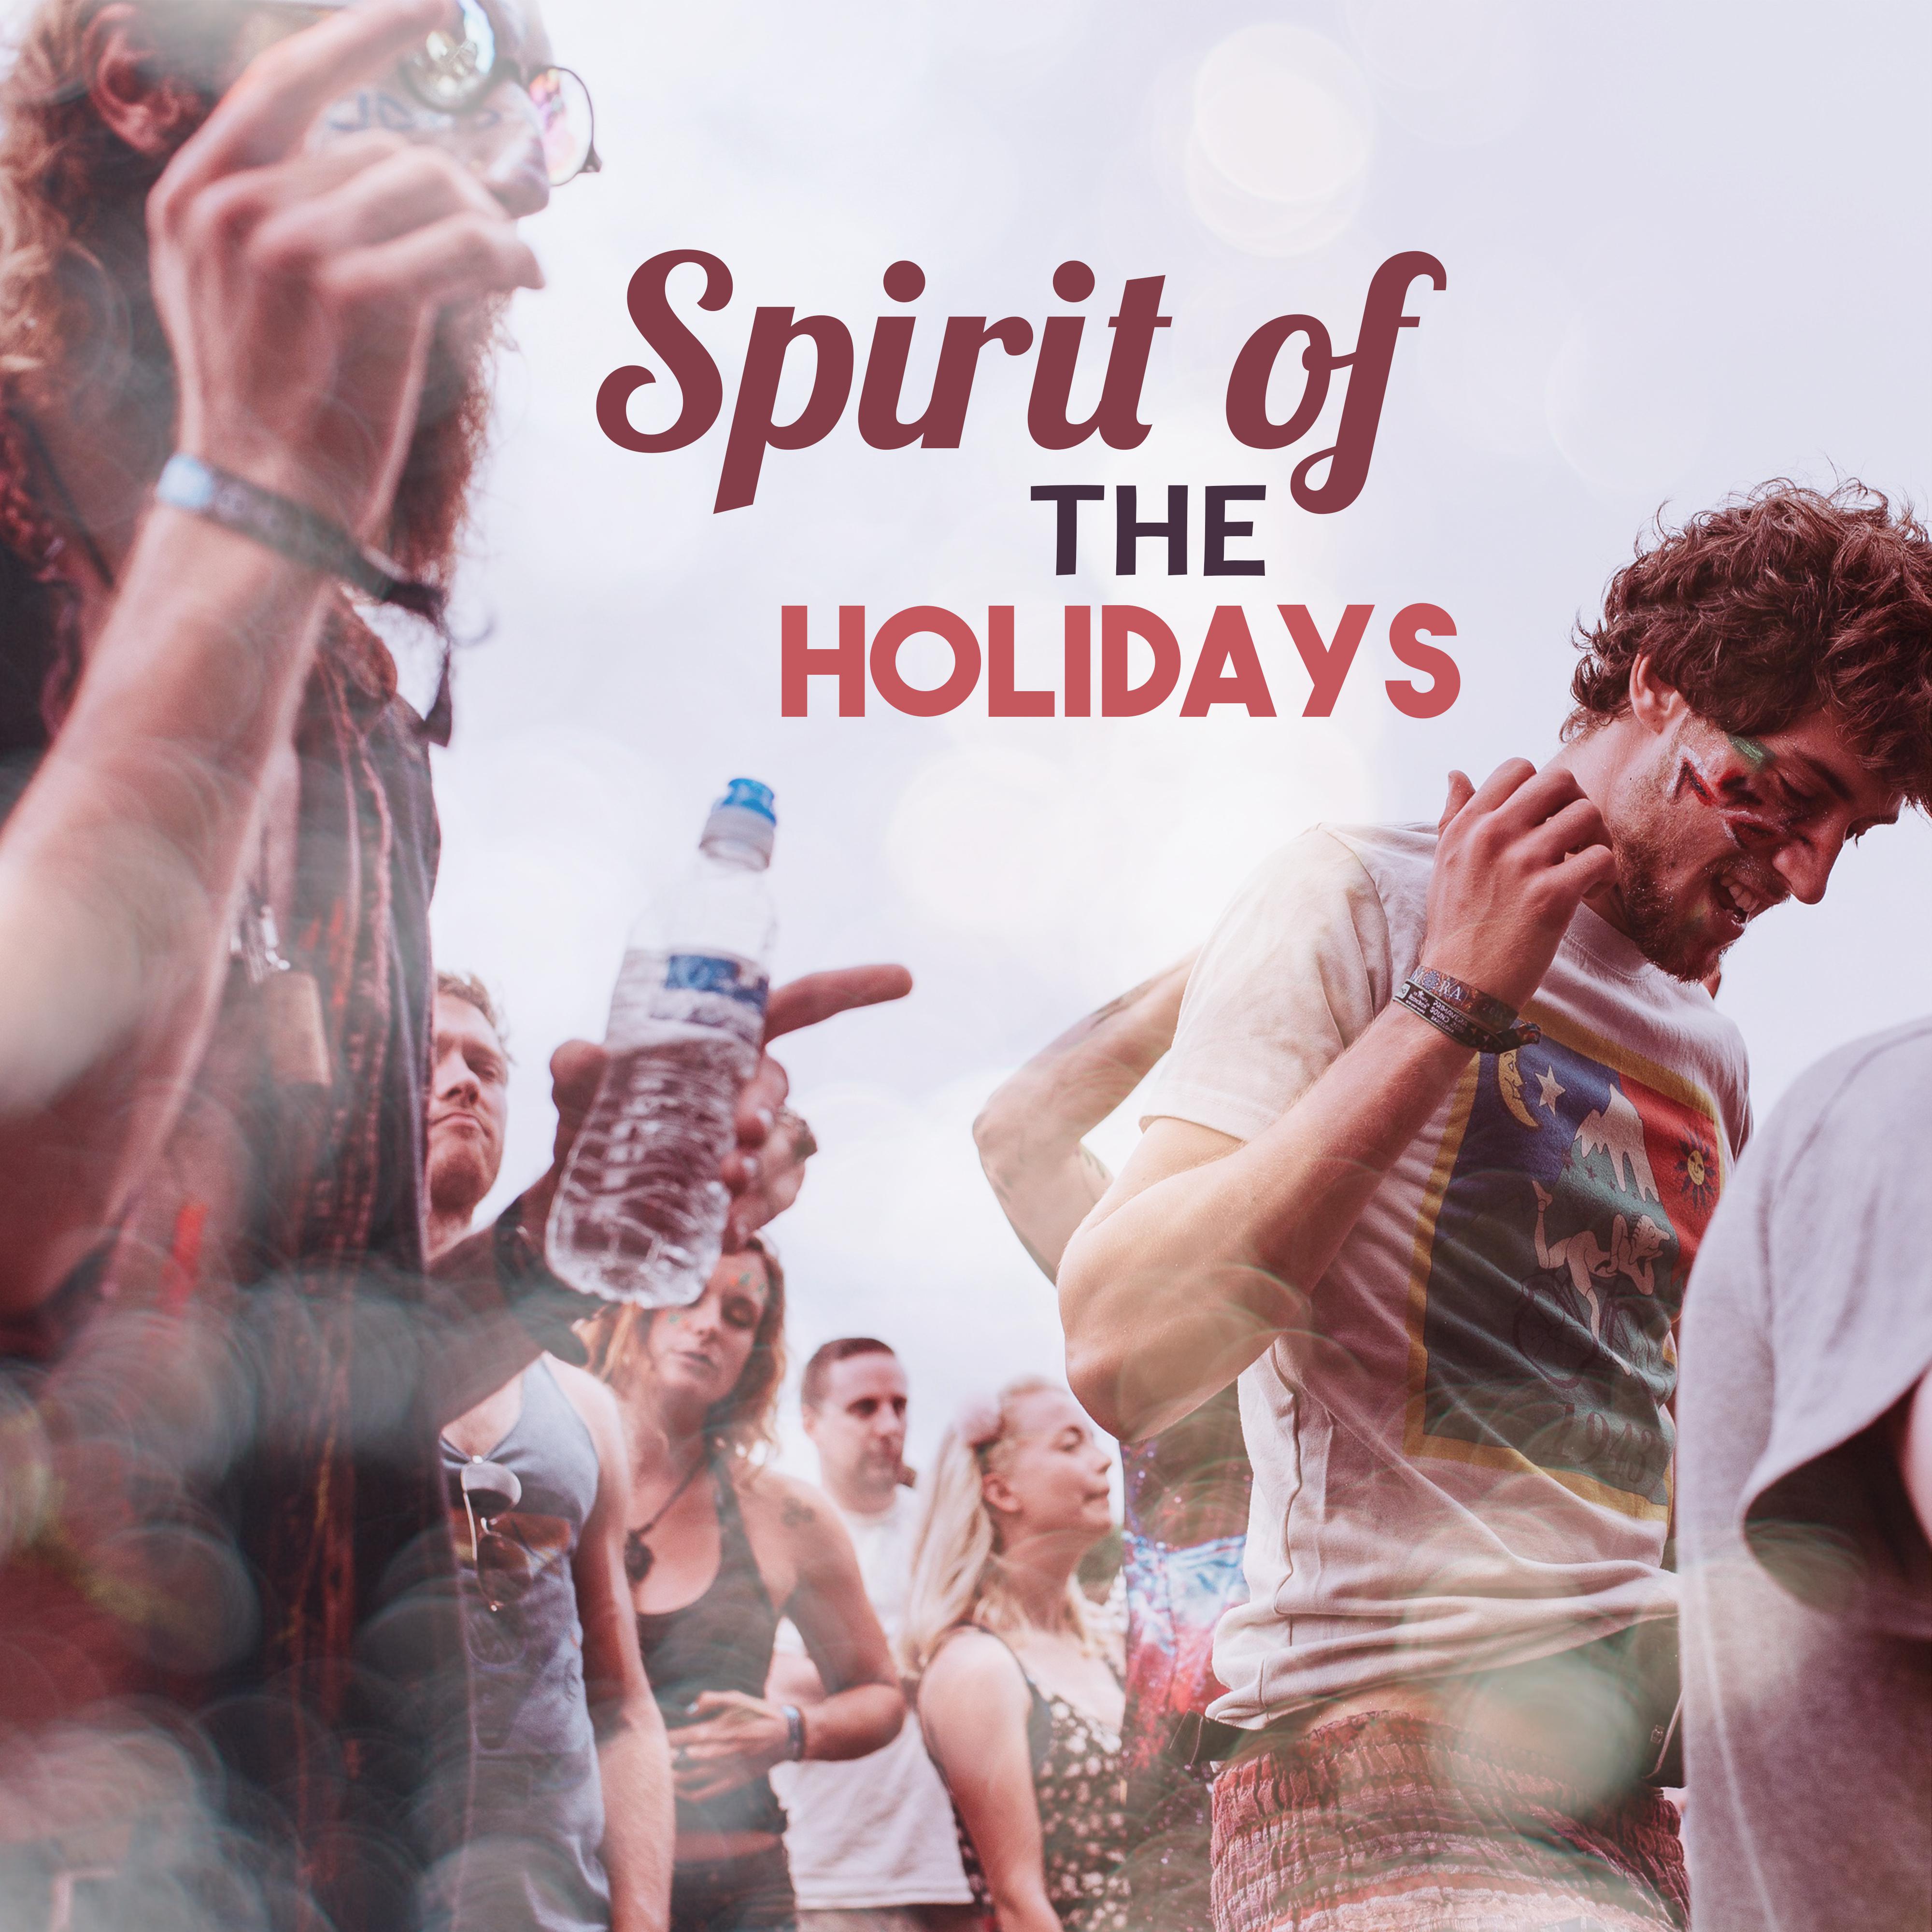 Spirit of the Holidays - Rhythms Dance, Fantastic Fun on the Beach, Colorful Drinks, Interesting Holiday, Fun Moments, Best DJ